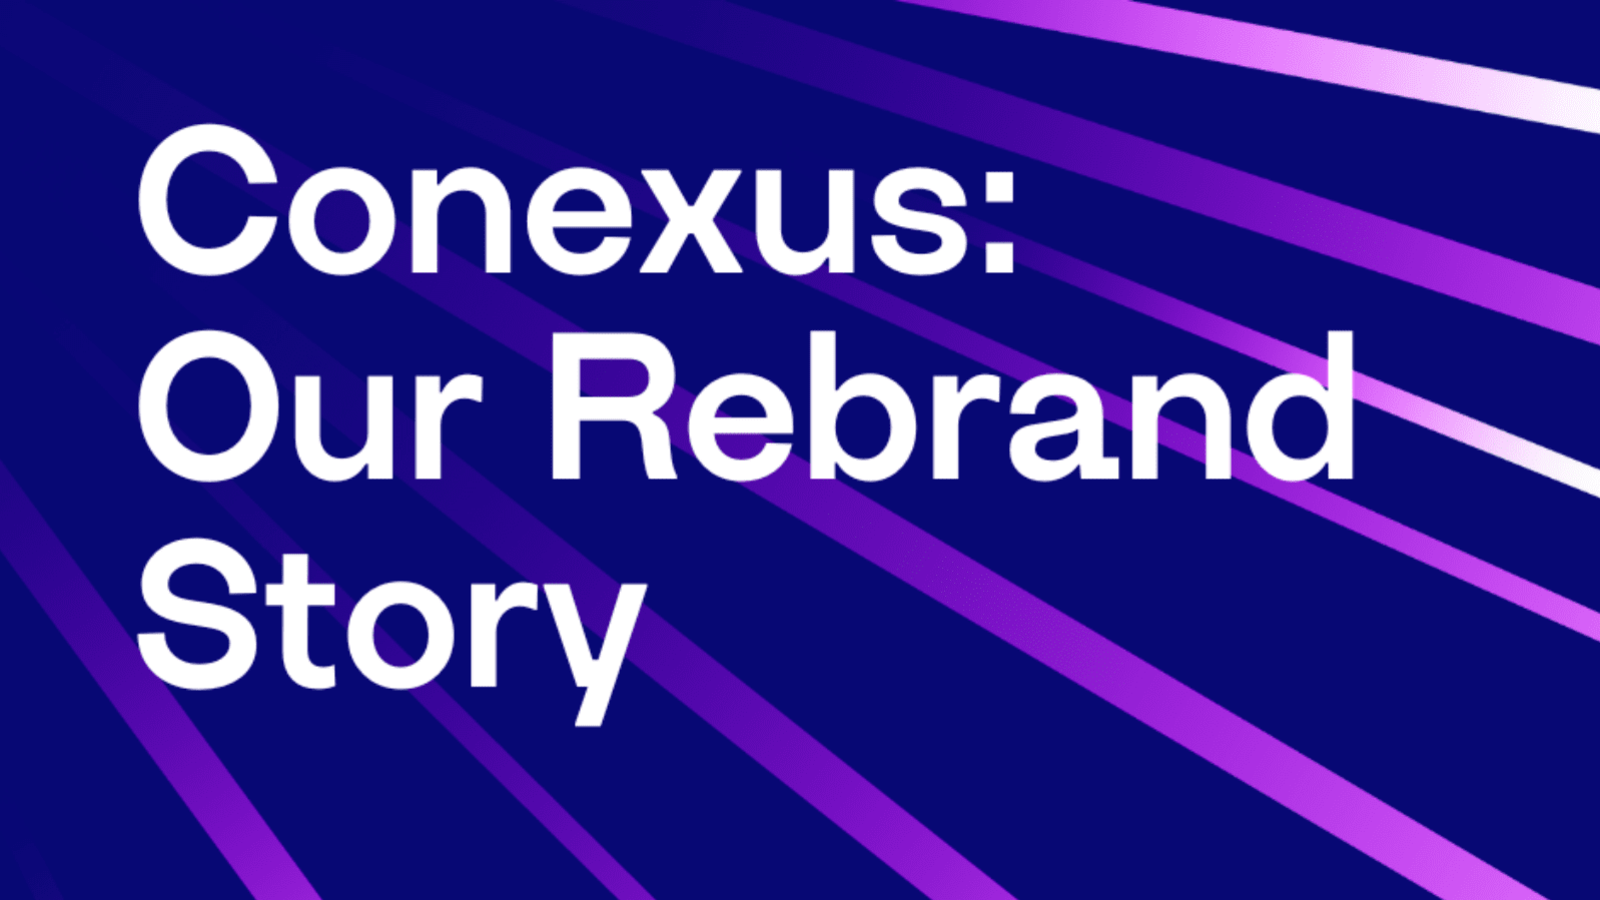 Blog Img - Conexus: Our Rebrand Story